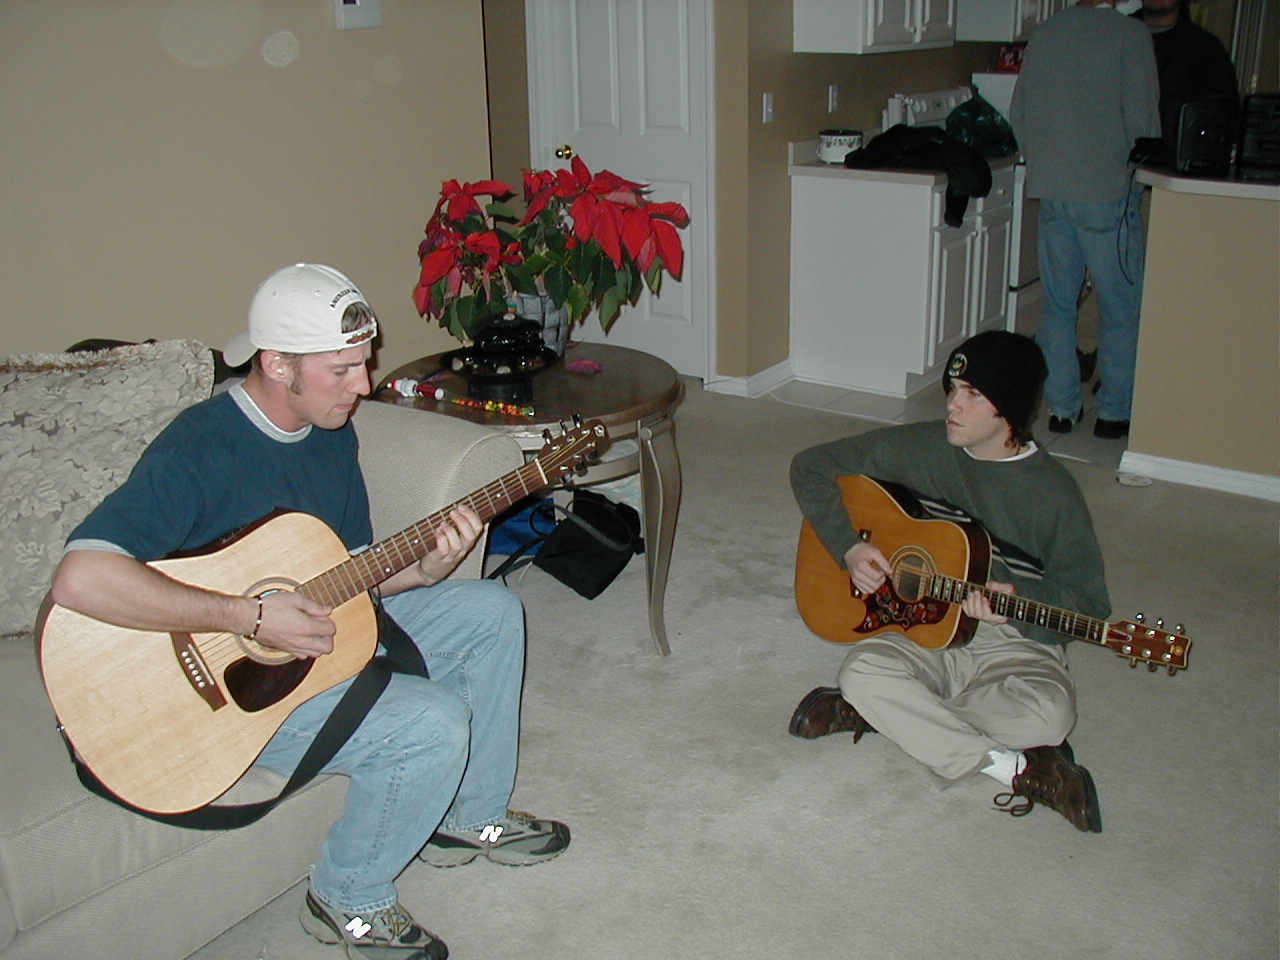 me and dylan jamming